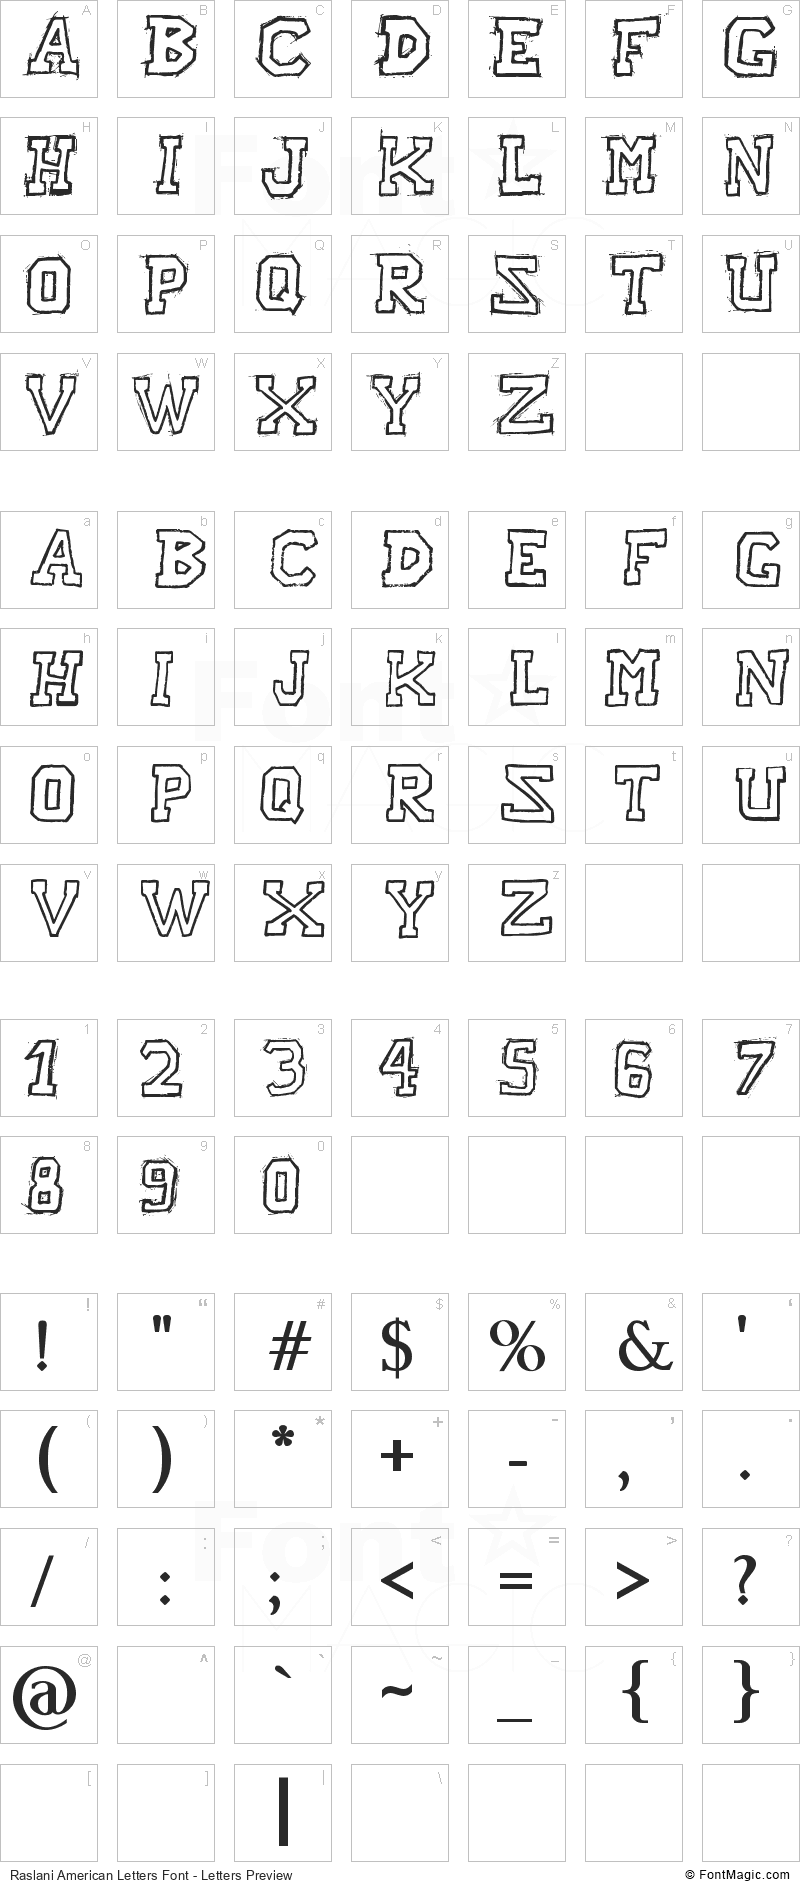 Raslani American Letters Font - All Latters Preview Chart